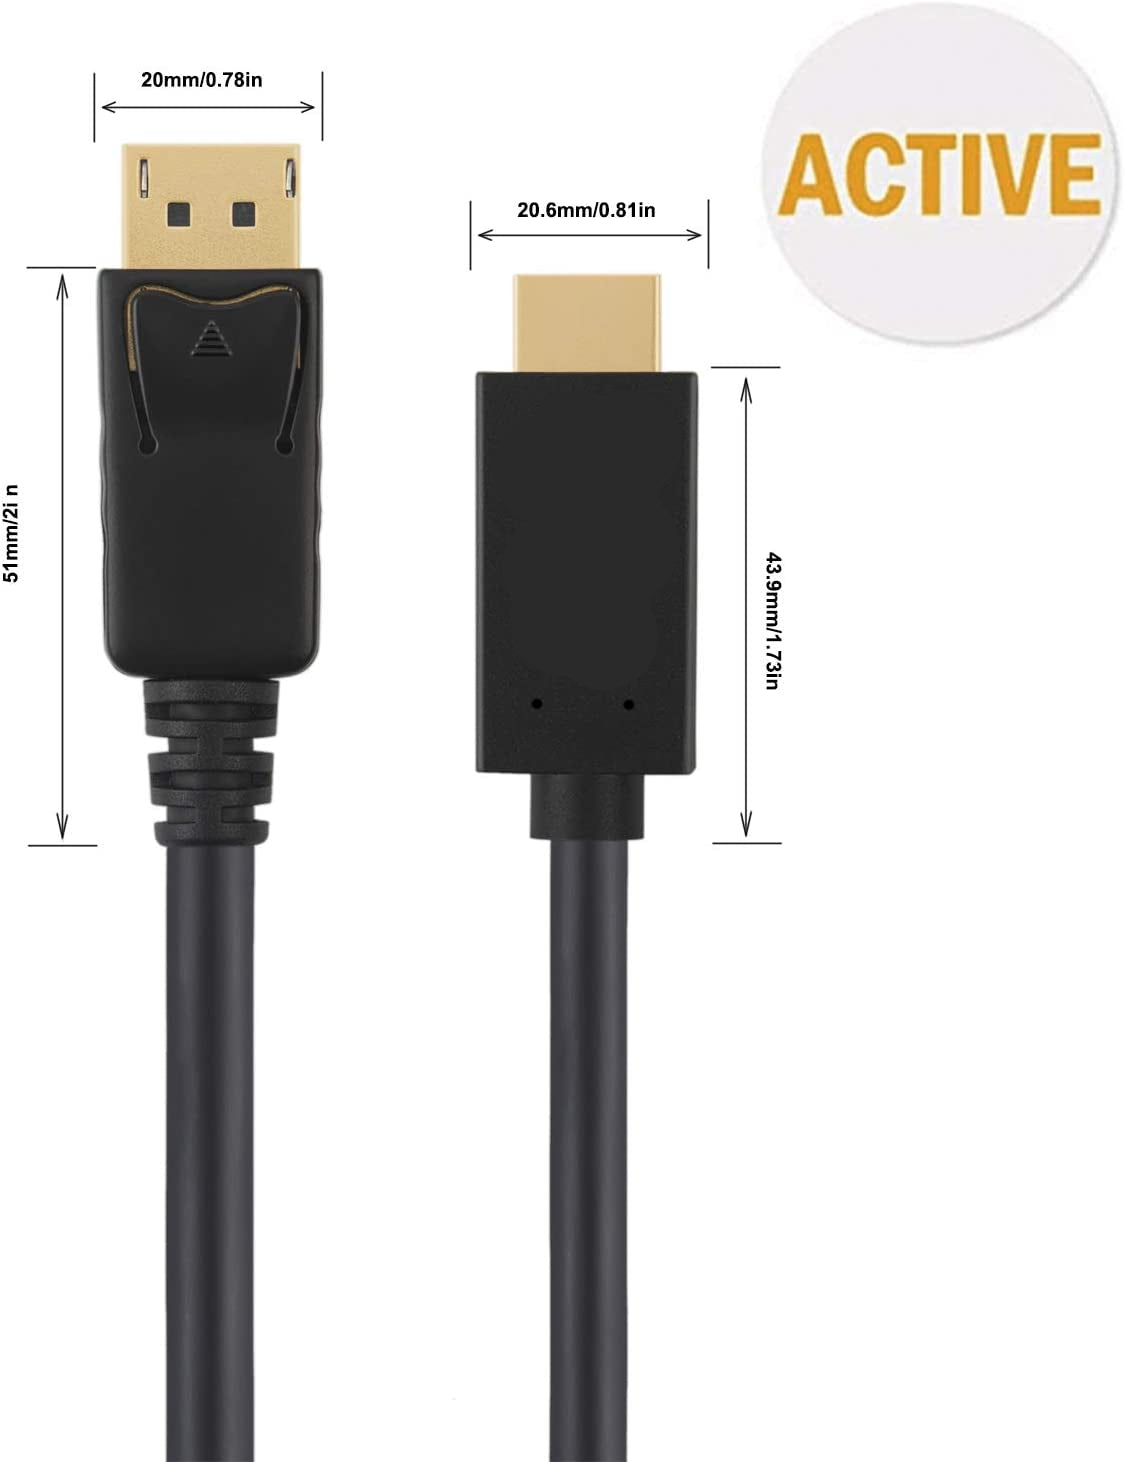 DisplayPort to HDMI Cable 6FT,  DP 1.2 to HDMI, Support 4K x 2K & 3D Audio&Video